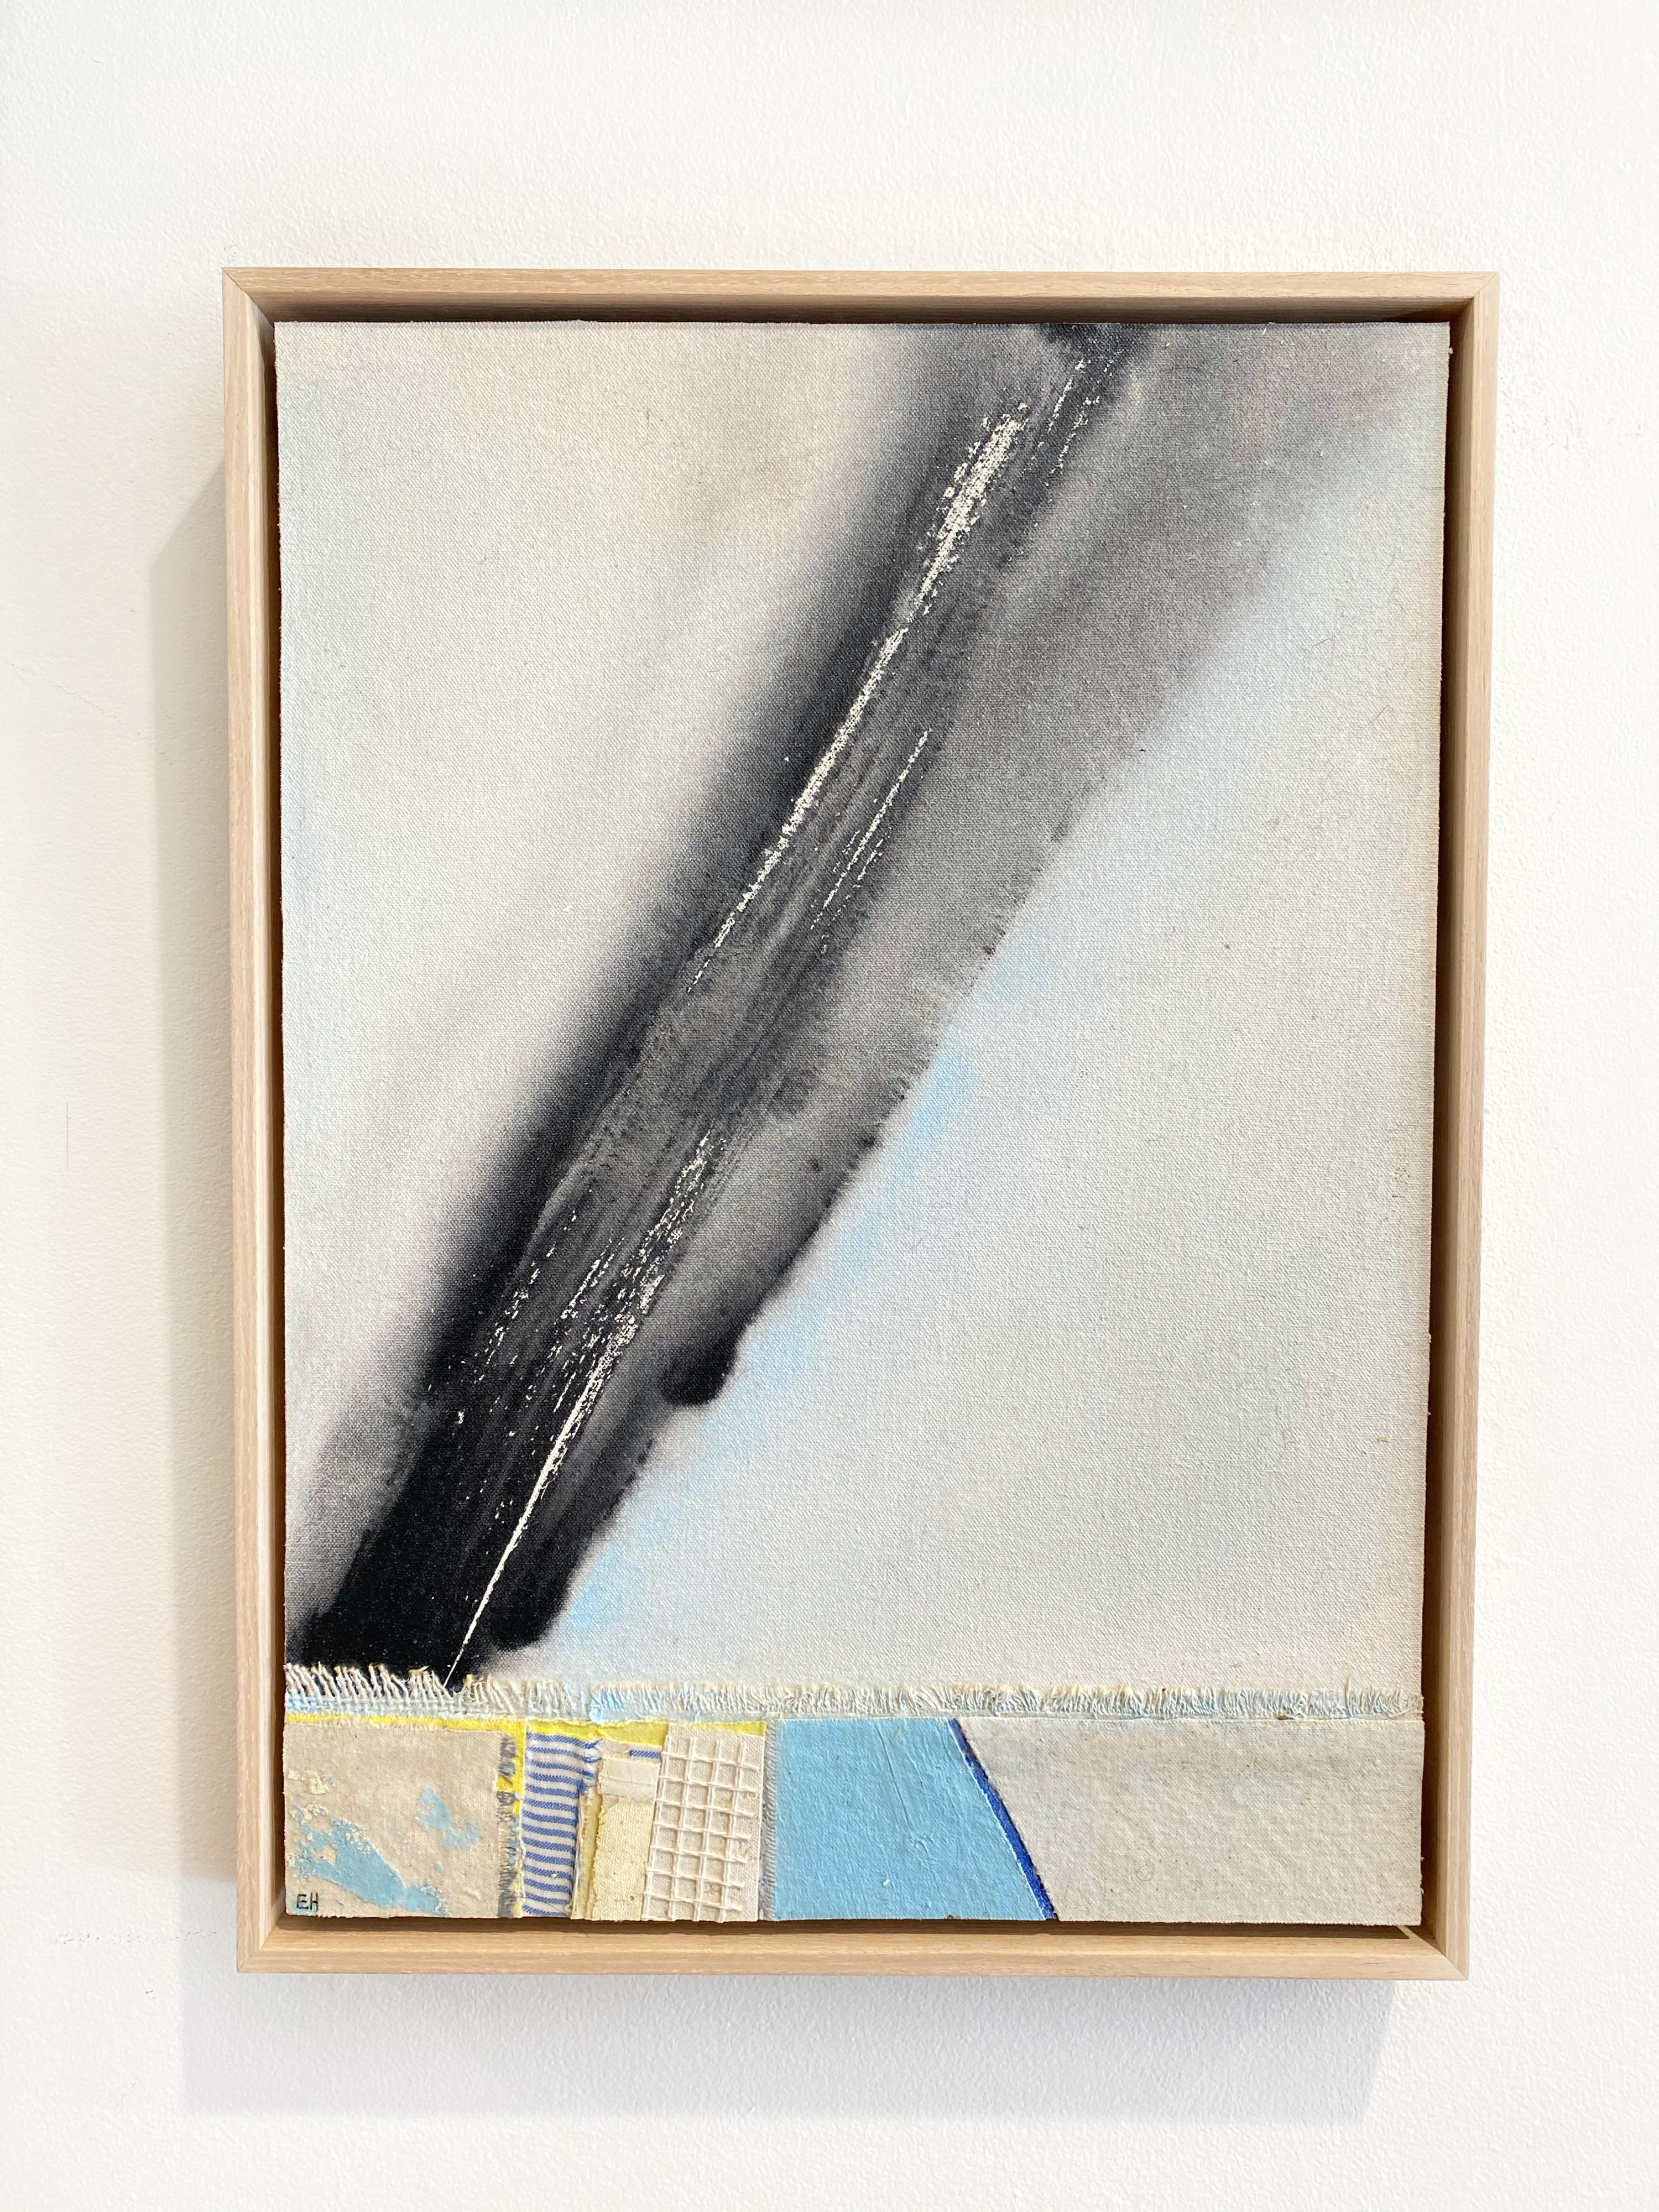 “The Front #1” by Eugene Healy, 2020. Fabric collage and oil on canvas.  14 x 20 in. Framed: 21 x 15 in. This abstract, landscape painting features an abstracted seascape with land, sea, and sky in an aerial view. Calming colors of light blue,